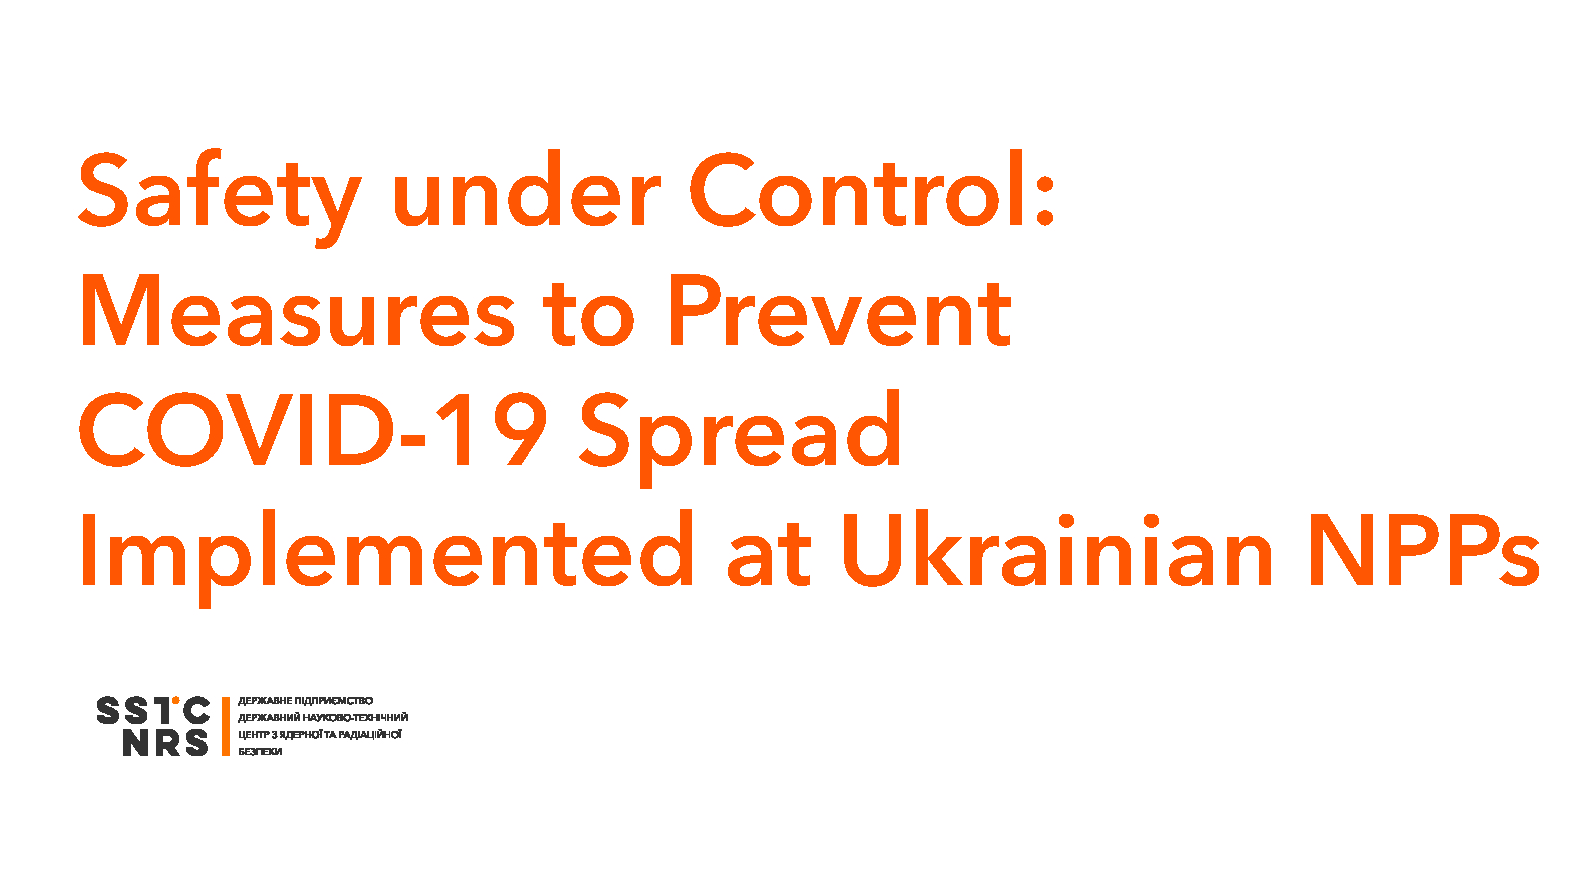 Safety under Control: Measures to Prevent COVID-19 Spread Implemented at Ukrainian NPPs